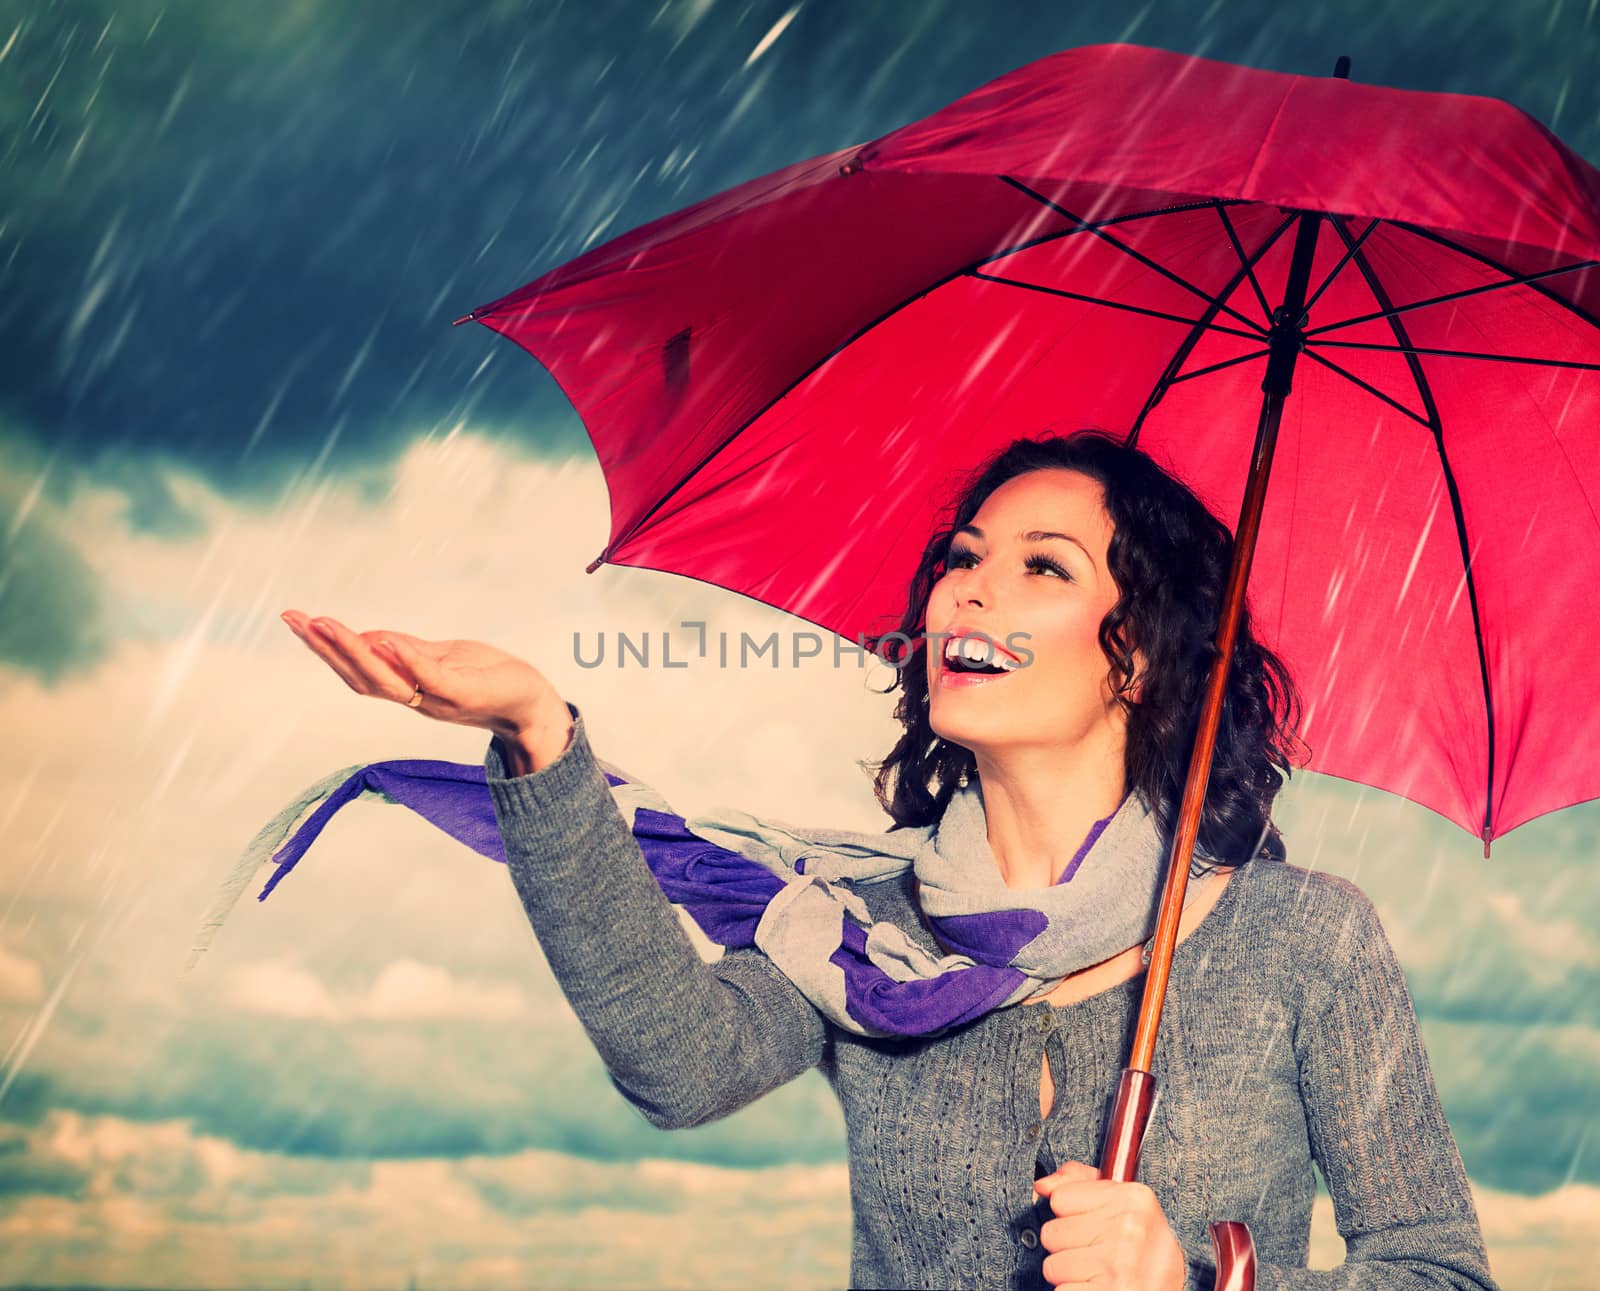 Smiling Woman with Umbrella over Autumn Rain Background by SubbotinaA